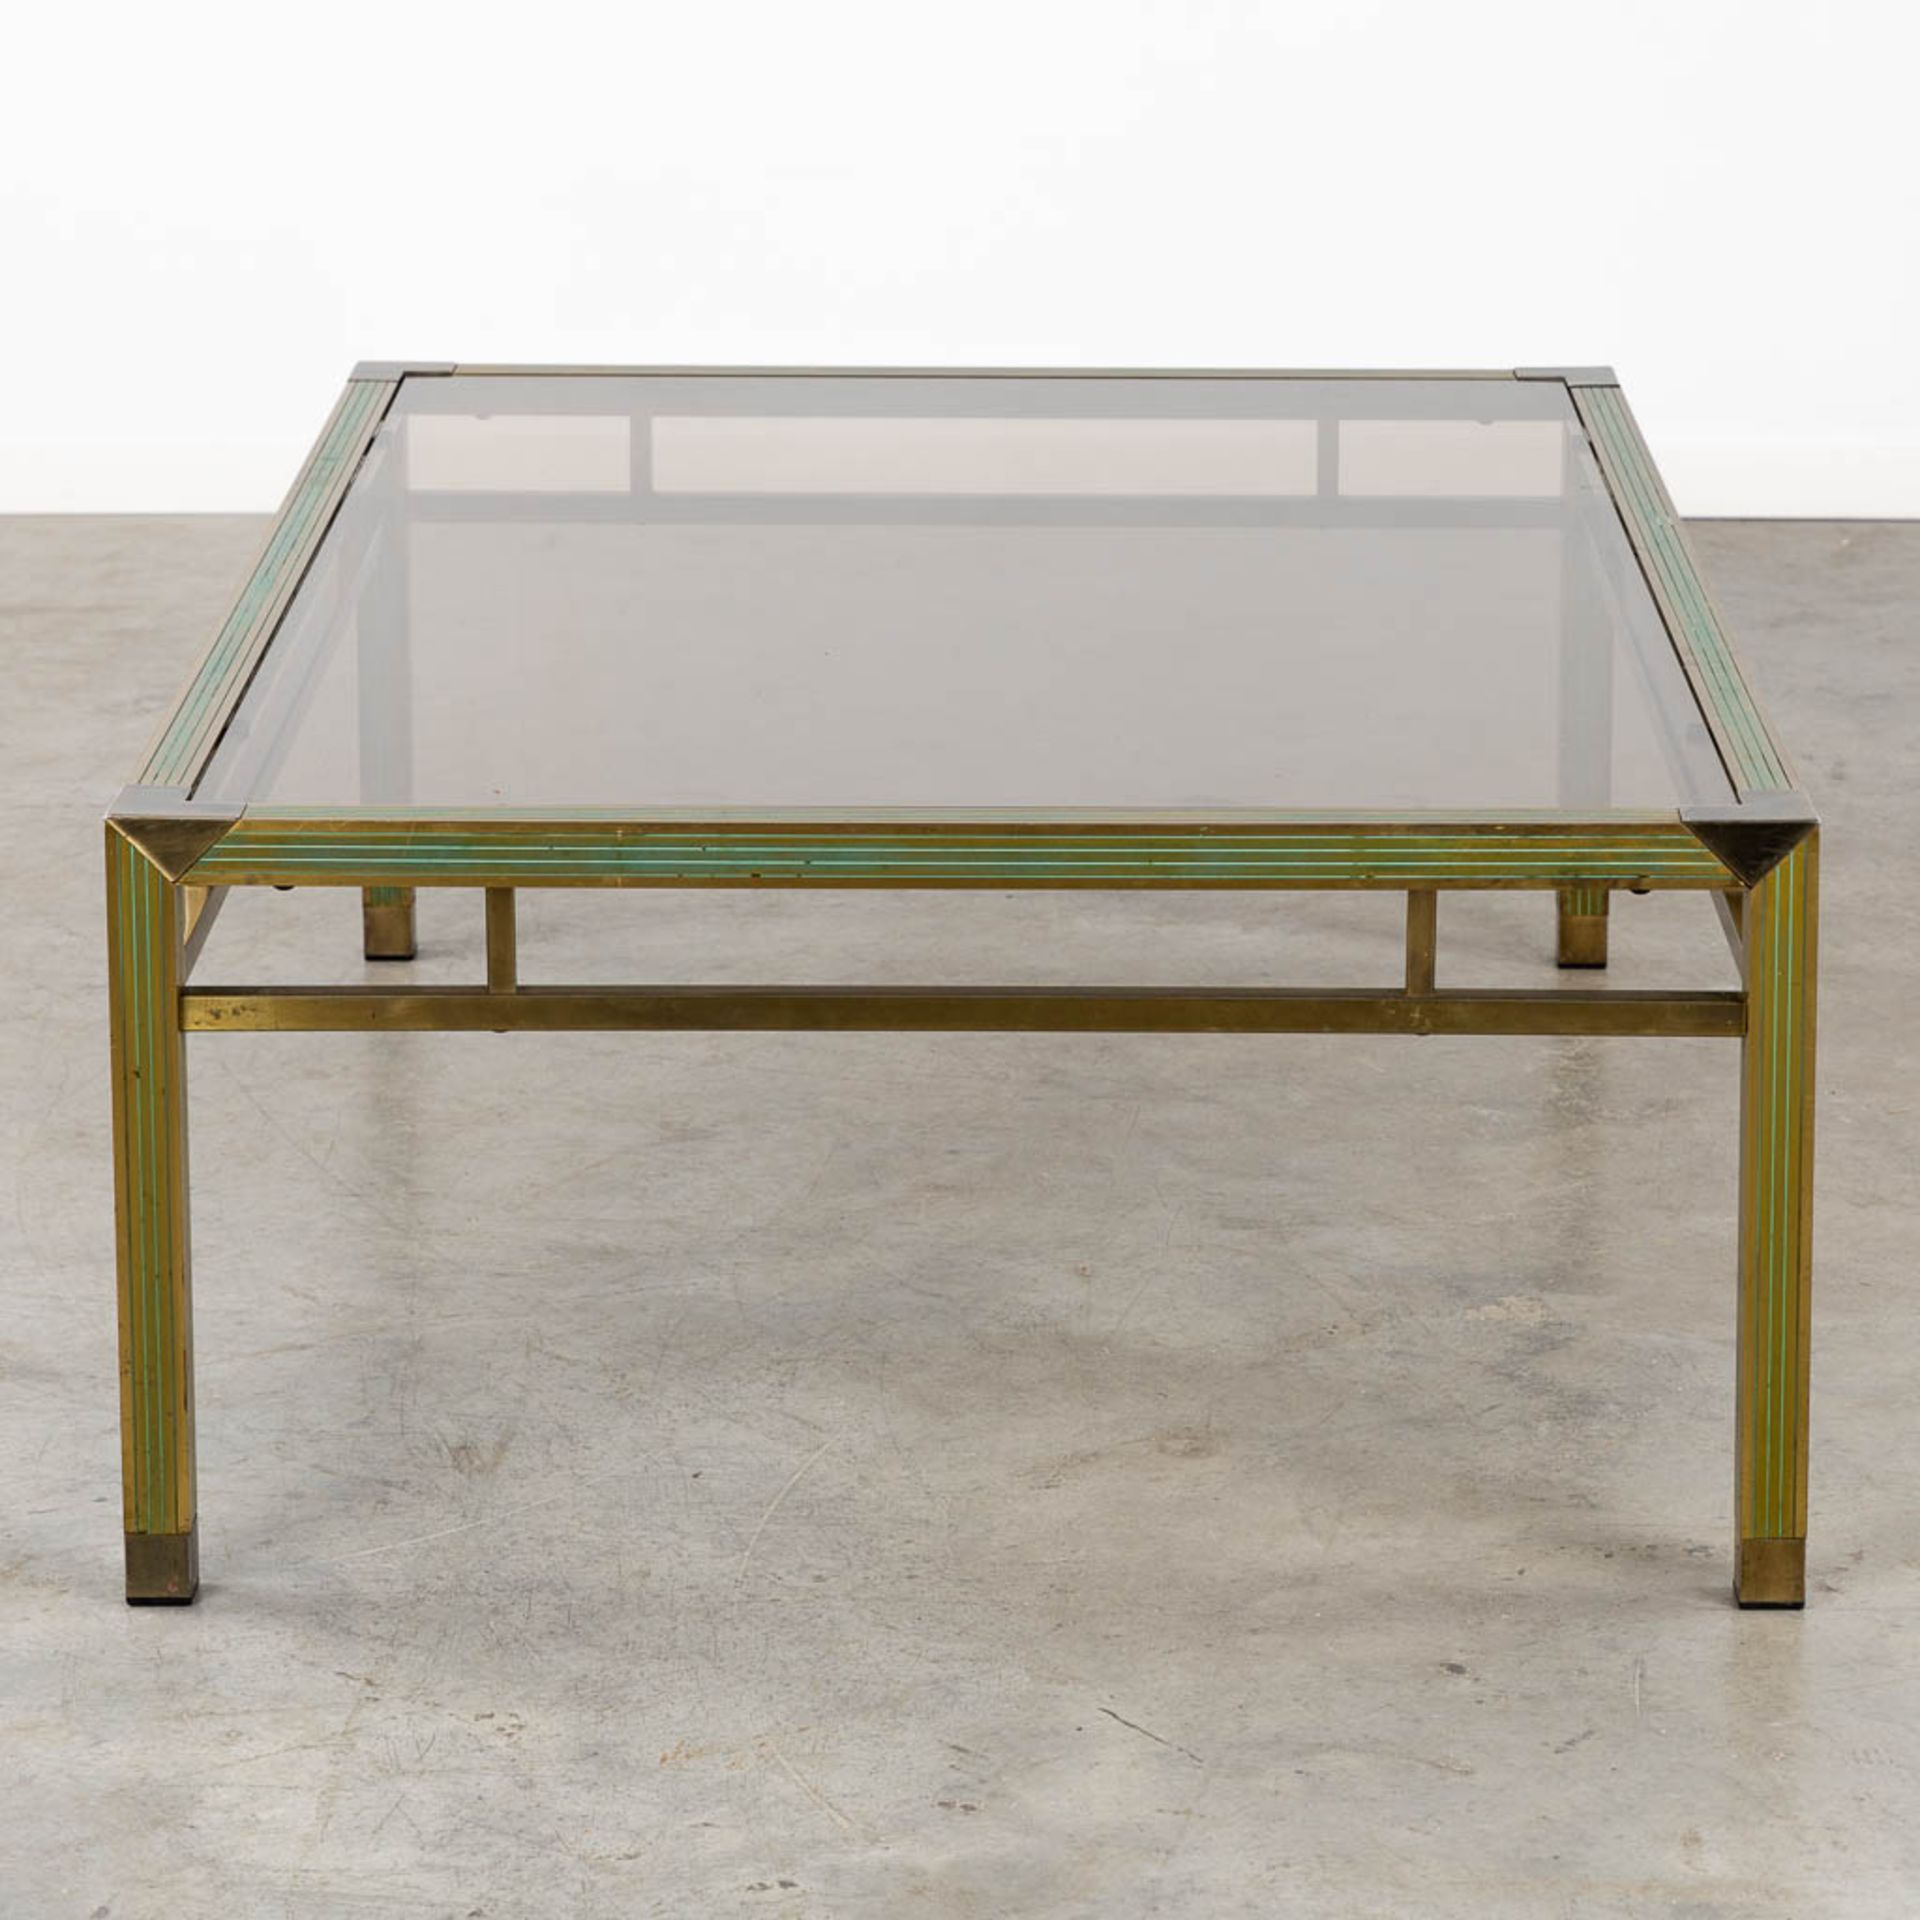 A mid-century coffee table, brass and glass in the style of Belgo Chrome. (L:88 x W:128 x H:43 cm) - Bild 6 aus 9